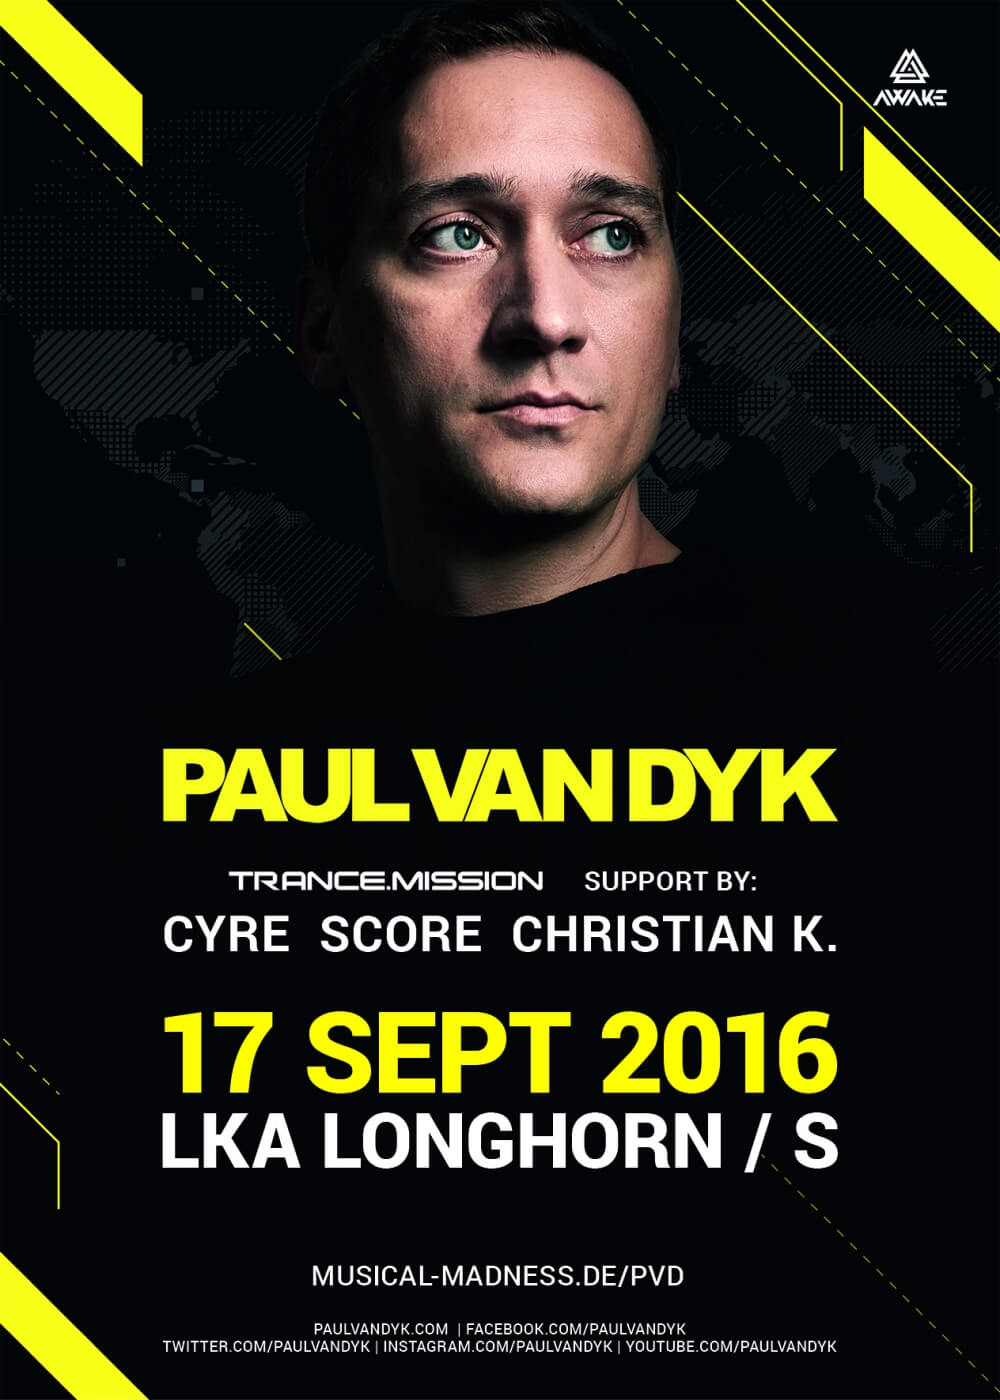 Musical Madness and AWAKE presents Trance.Mission with Paul van Dyk at LKA Longhorn, Stuttgart, Germany on 17th of September 2016